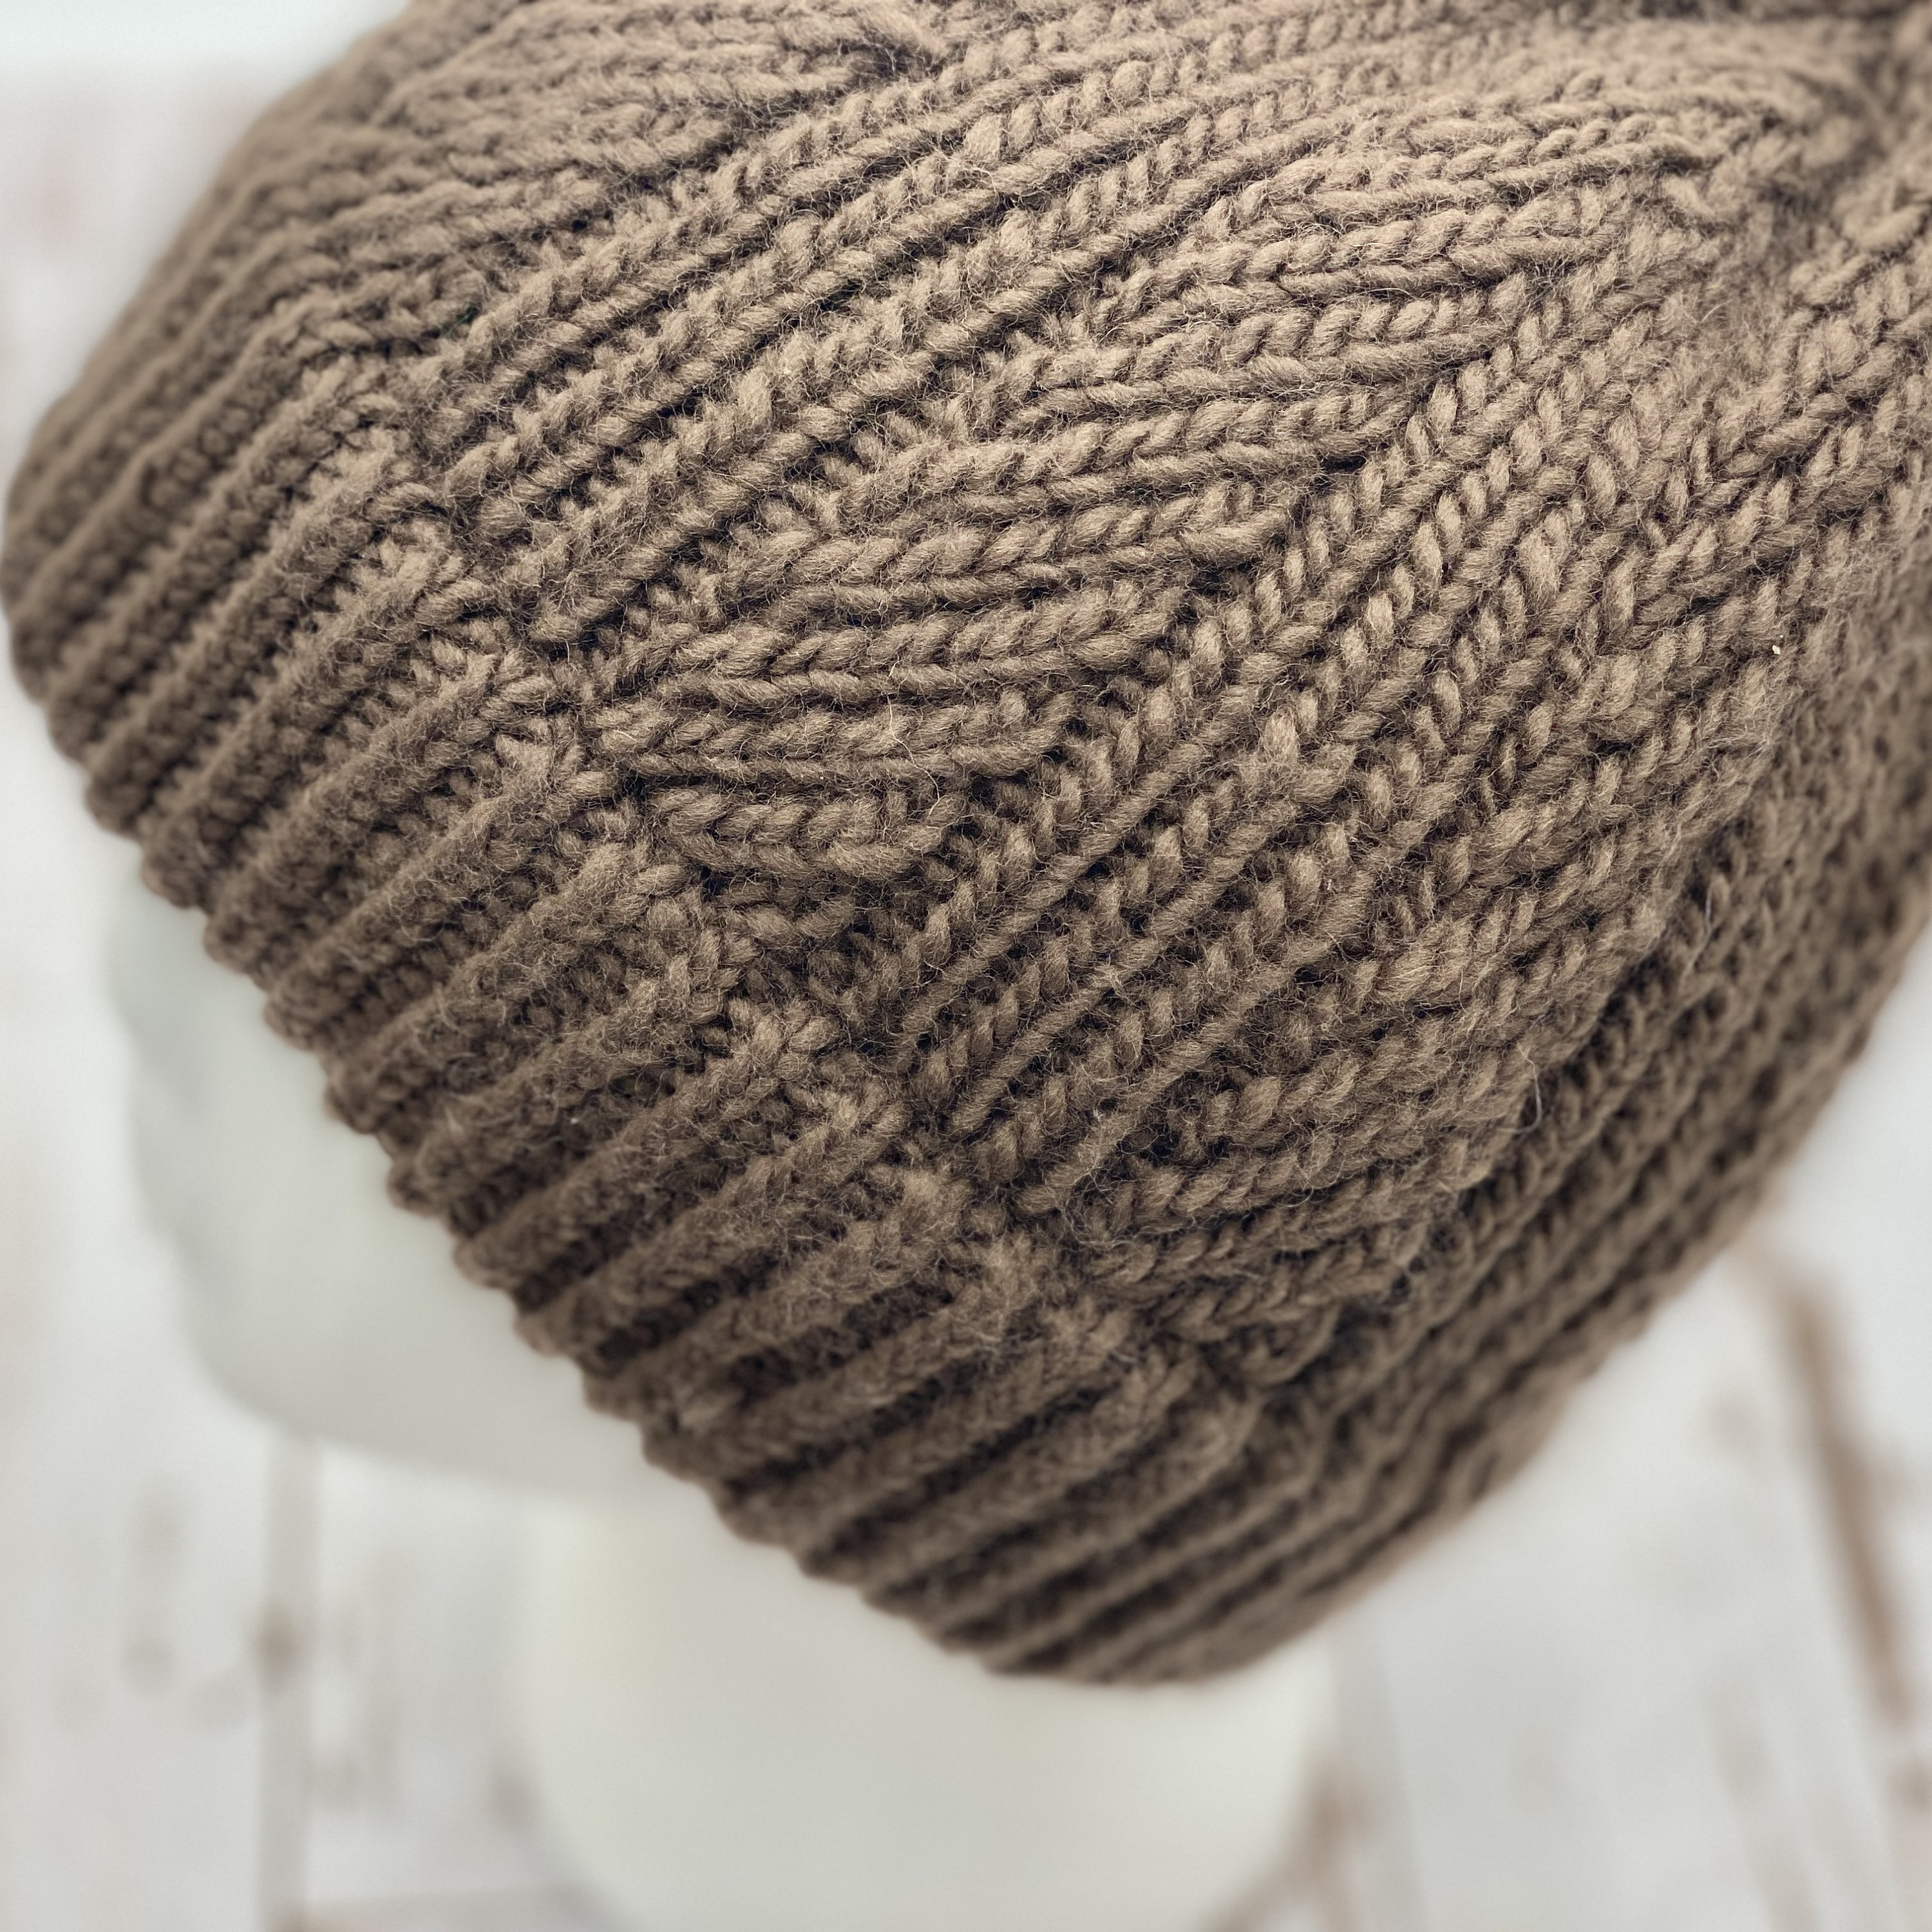 Knit Brown Cable Beanie, Beanie Hat, Winter Hats, Women's Winter Hat, Winter Hats for Women, Unisex Hat, Gifts for Her